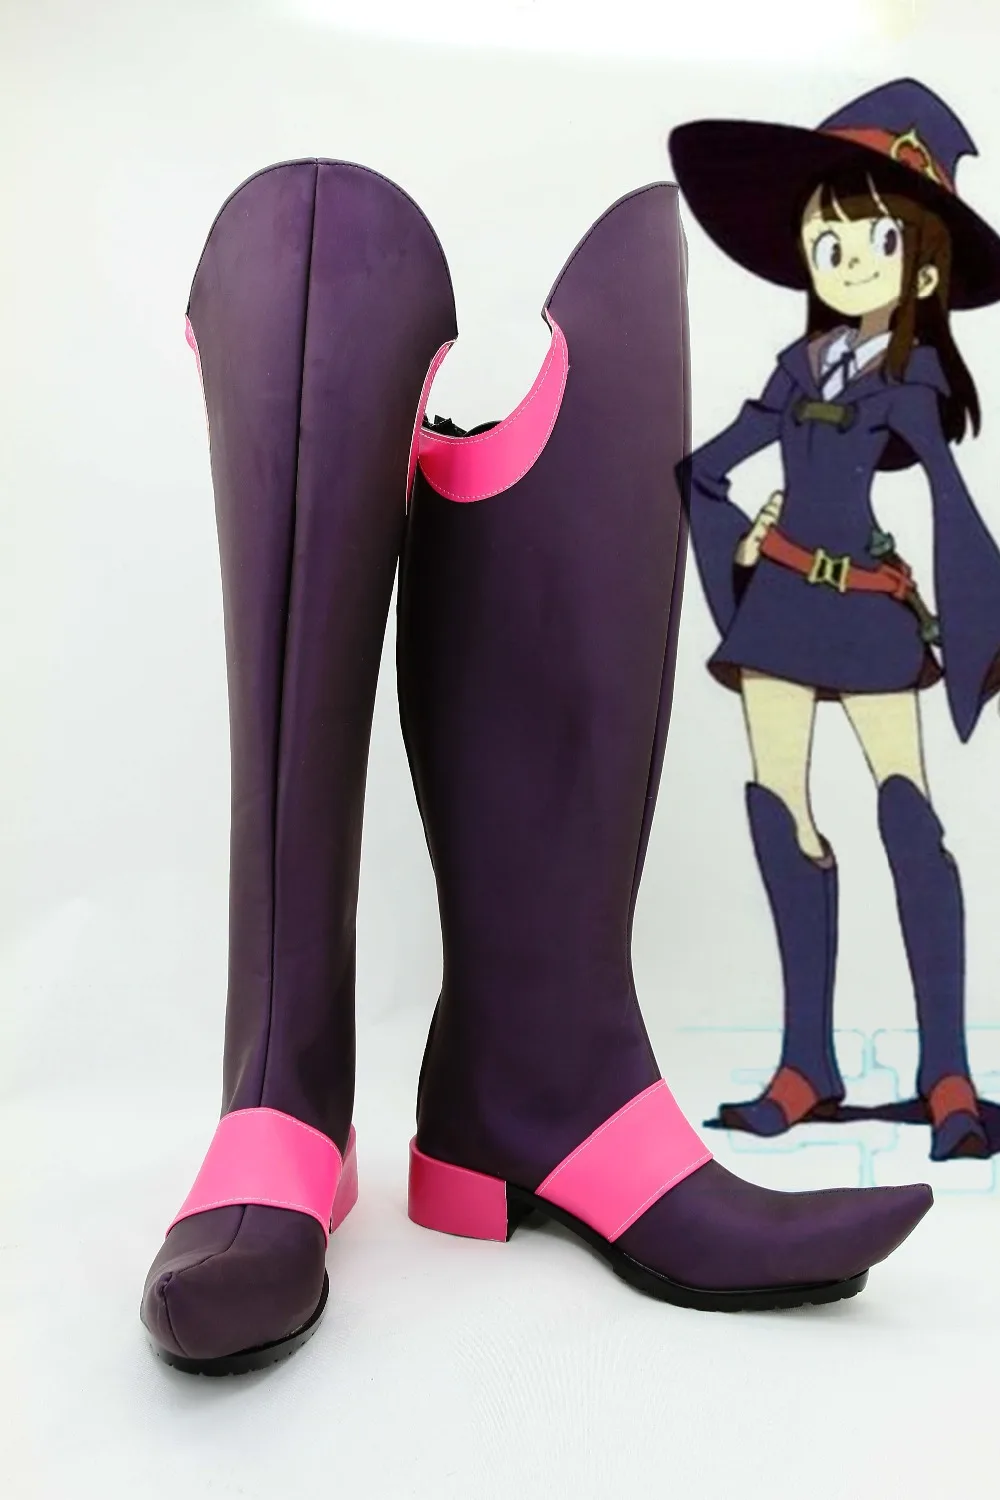 

New Little Witch Academia Cosplay Shoes Anime Akko Kagari patry Boots Tailor Made